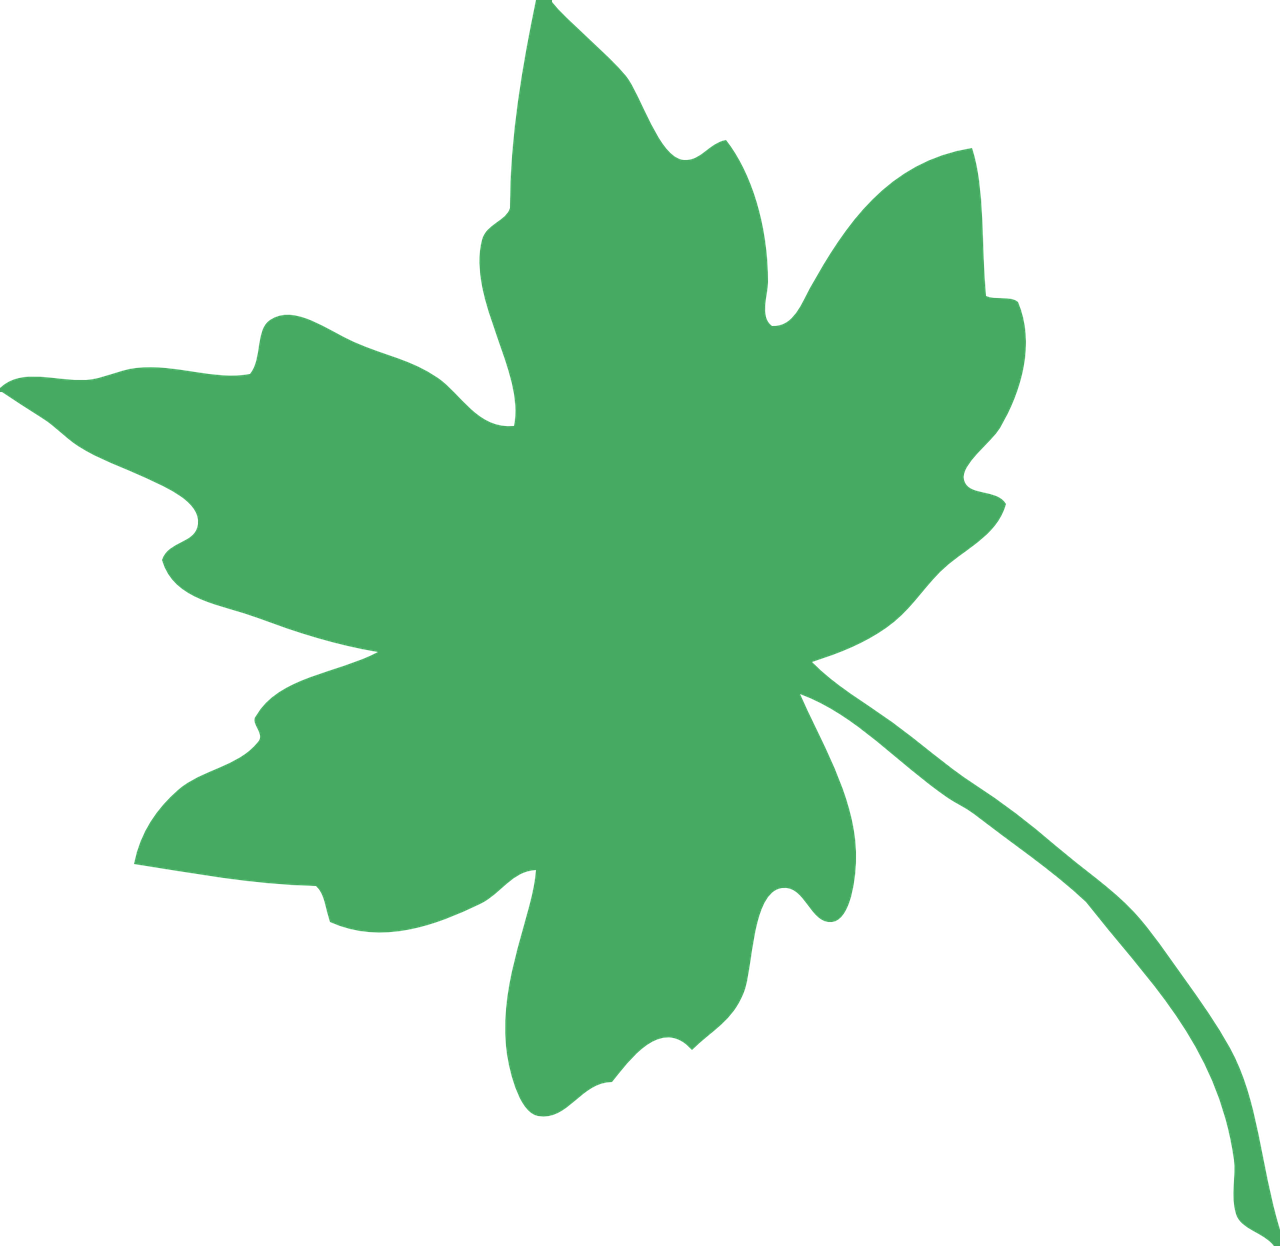 Leaf,tree,green Waste,maple,free Vector Graphics,free - Leaf,tree,green Waste,maple,free Vector Graphics,free (1280x1246)